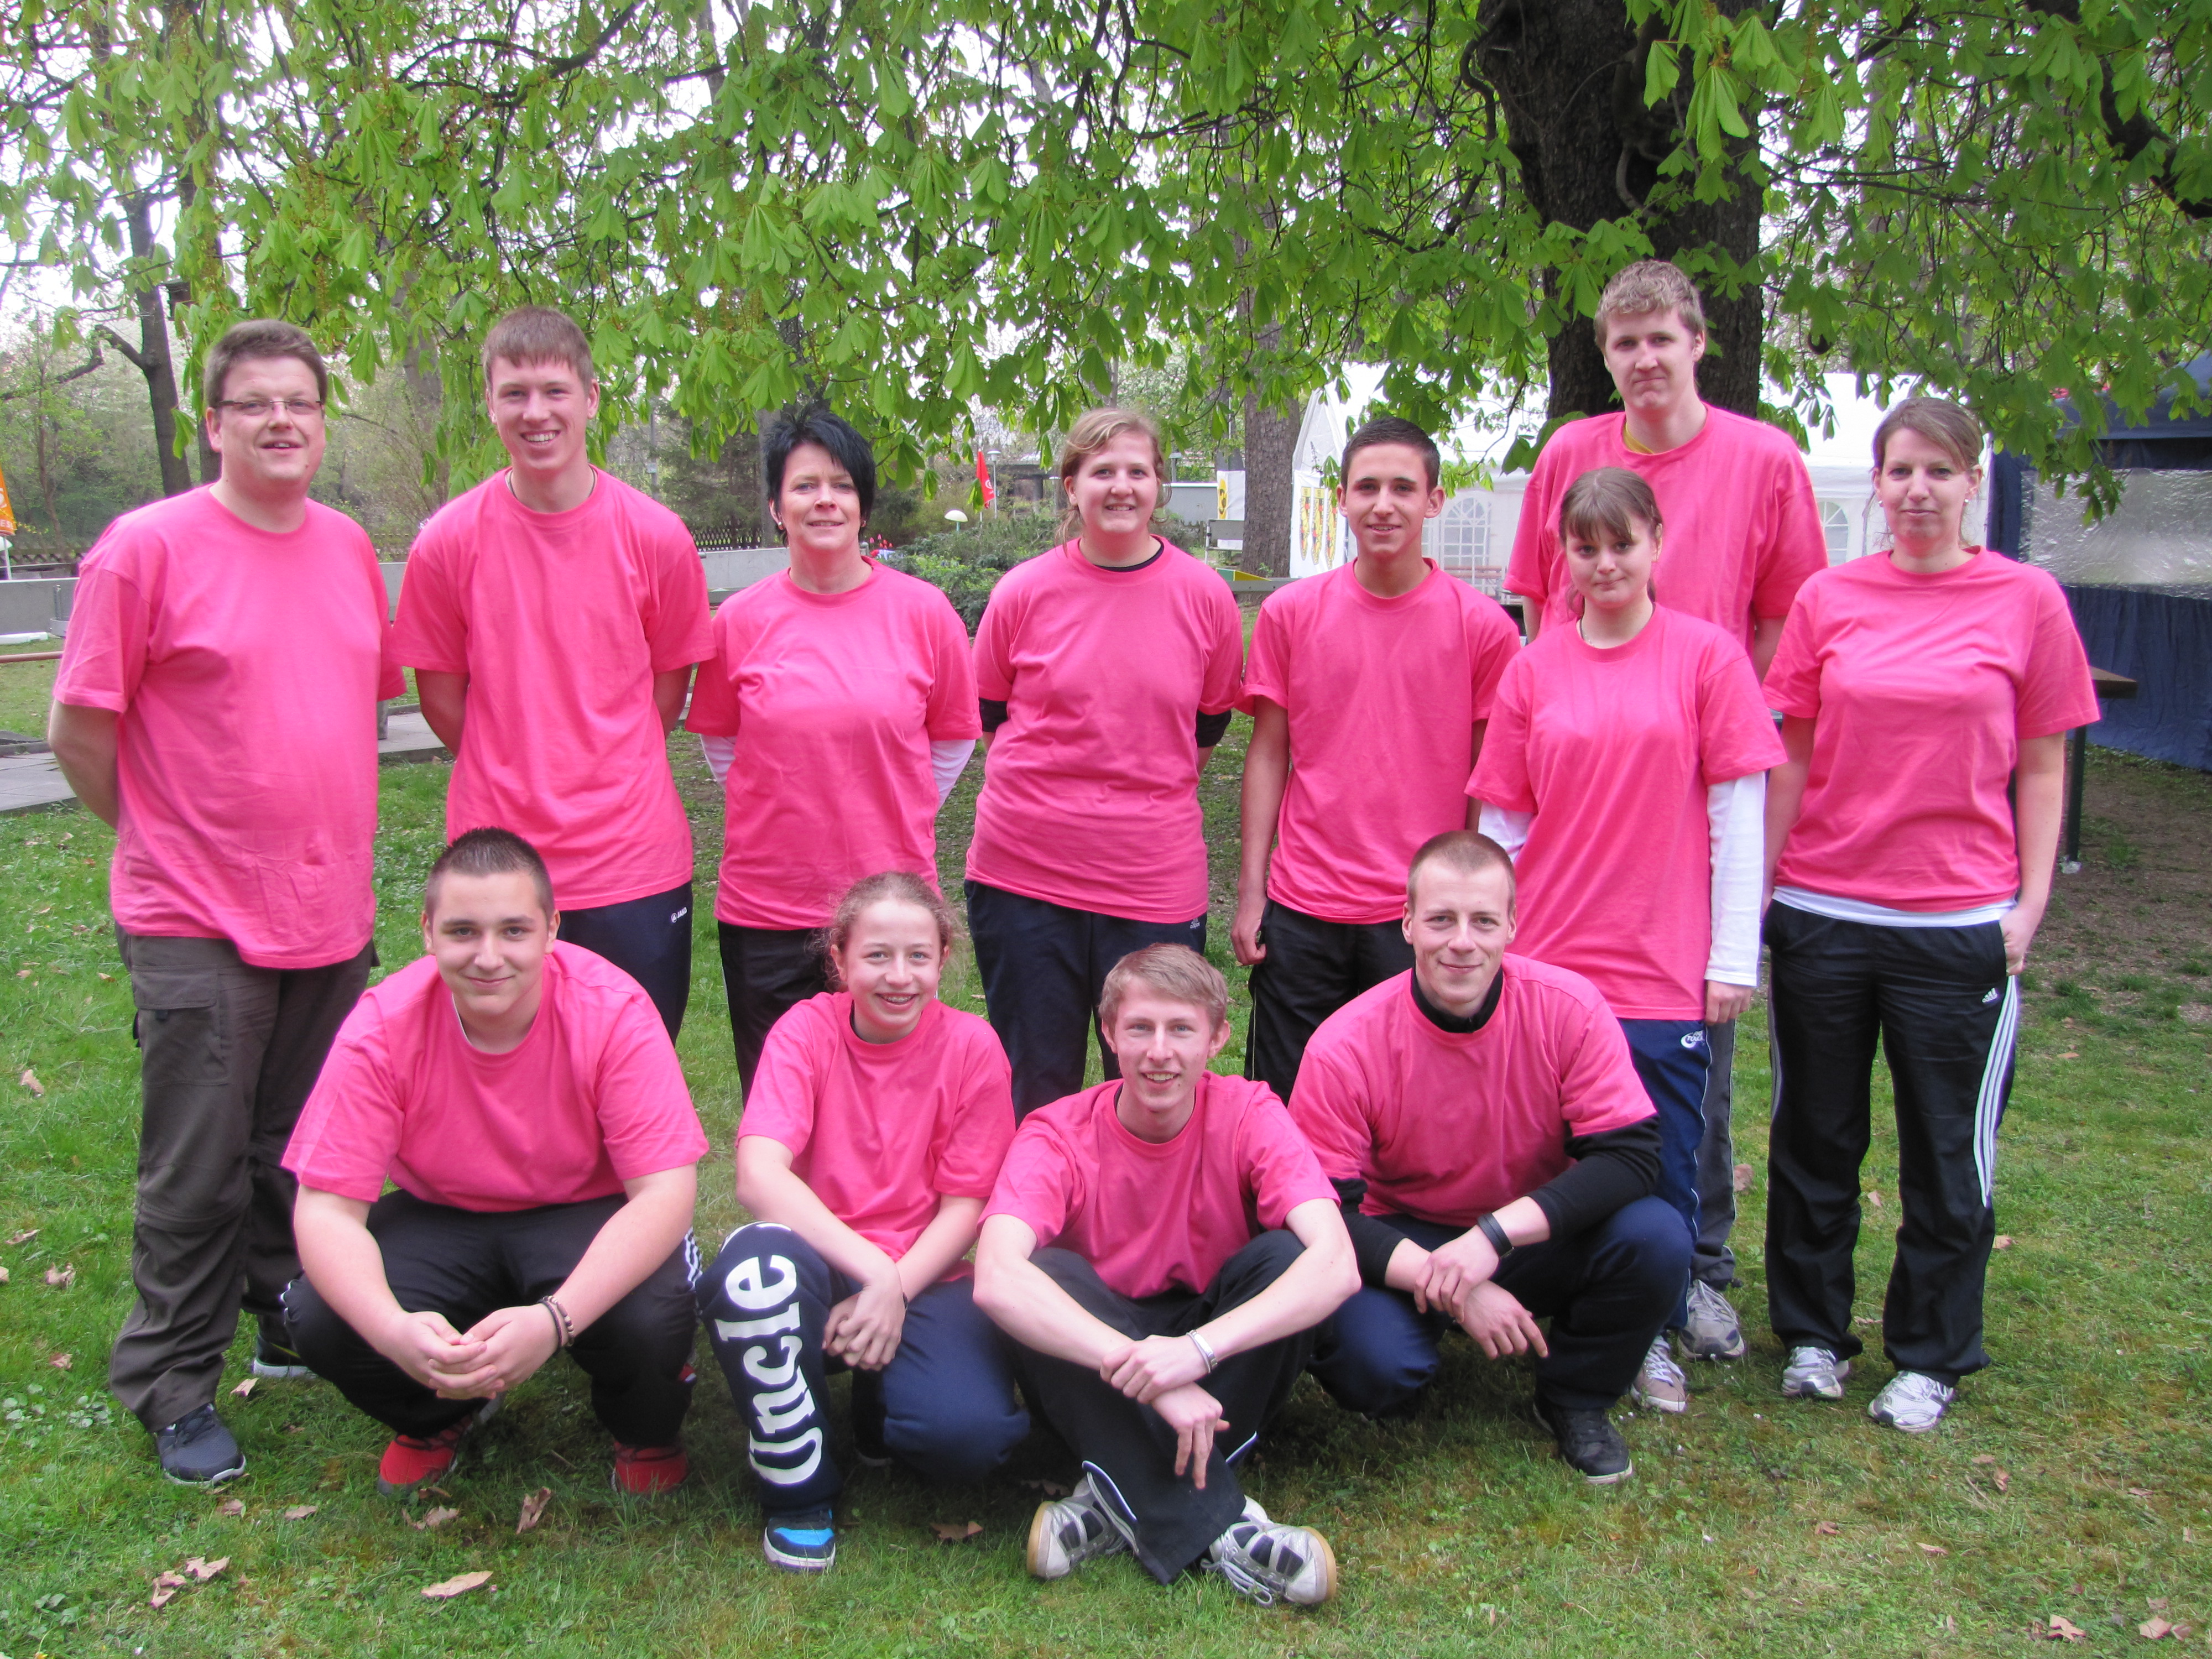 Team in pink